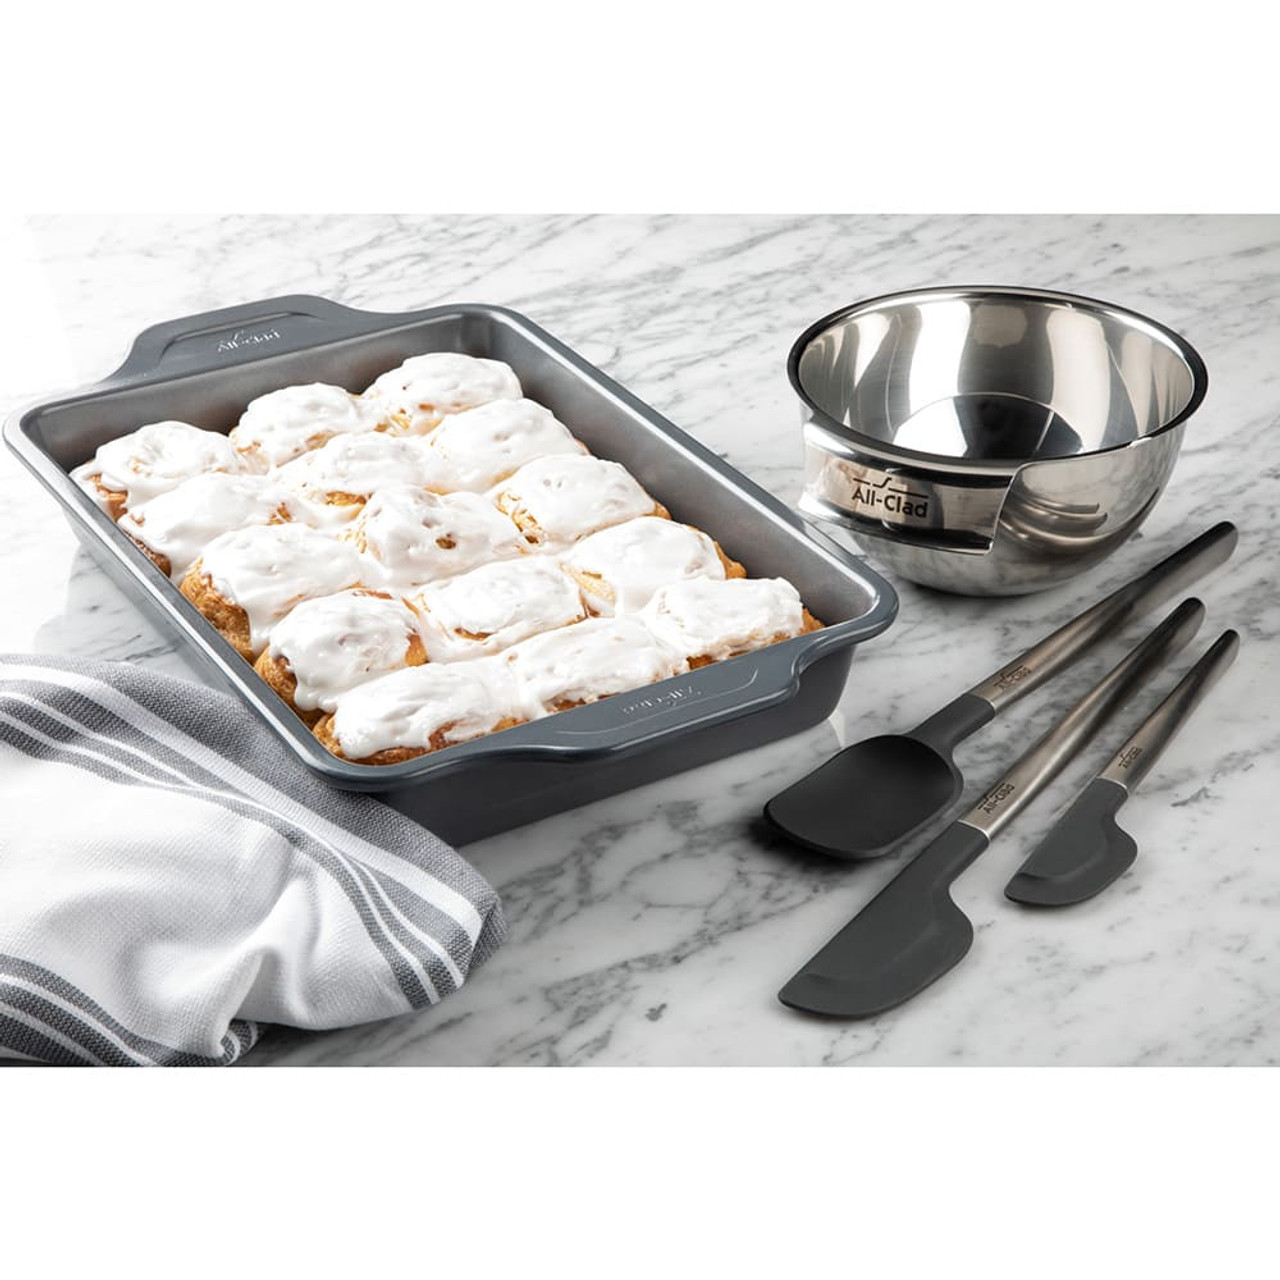 All-Clad Pro-Release Bakeware Muffin Pan